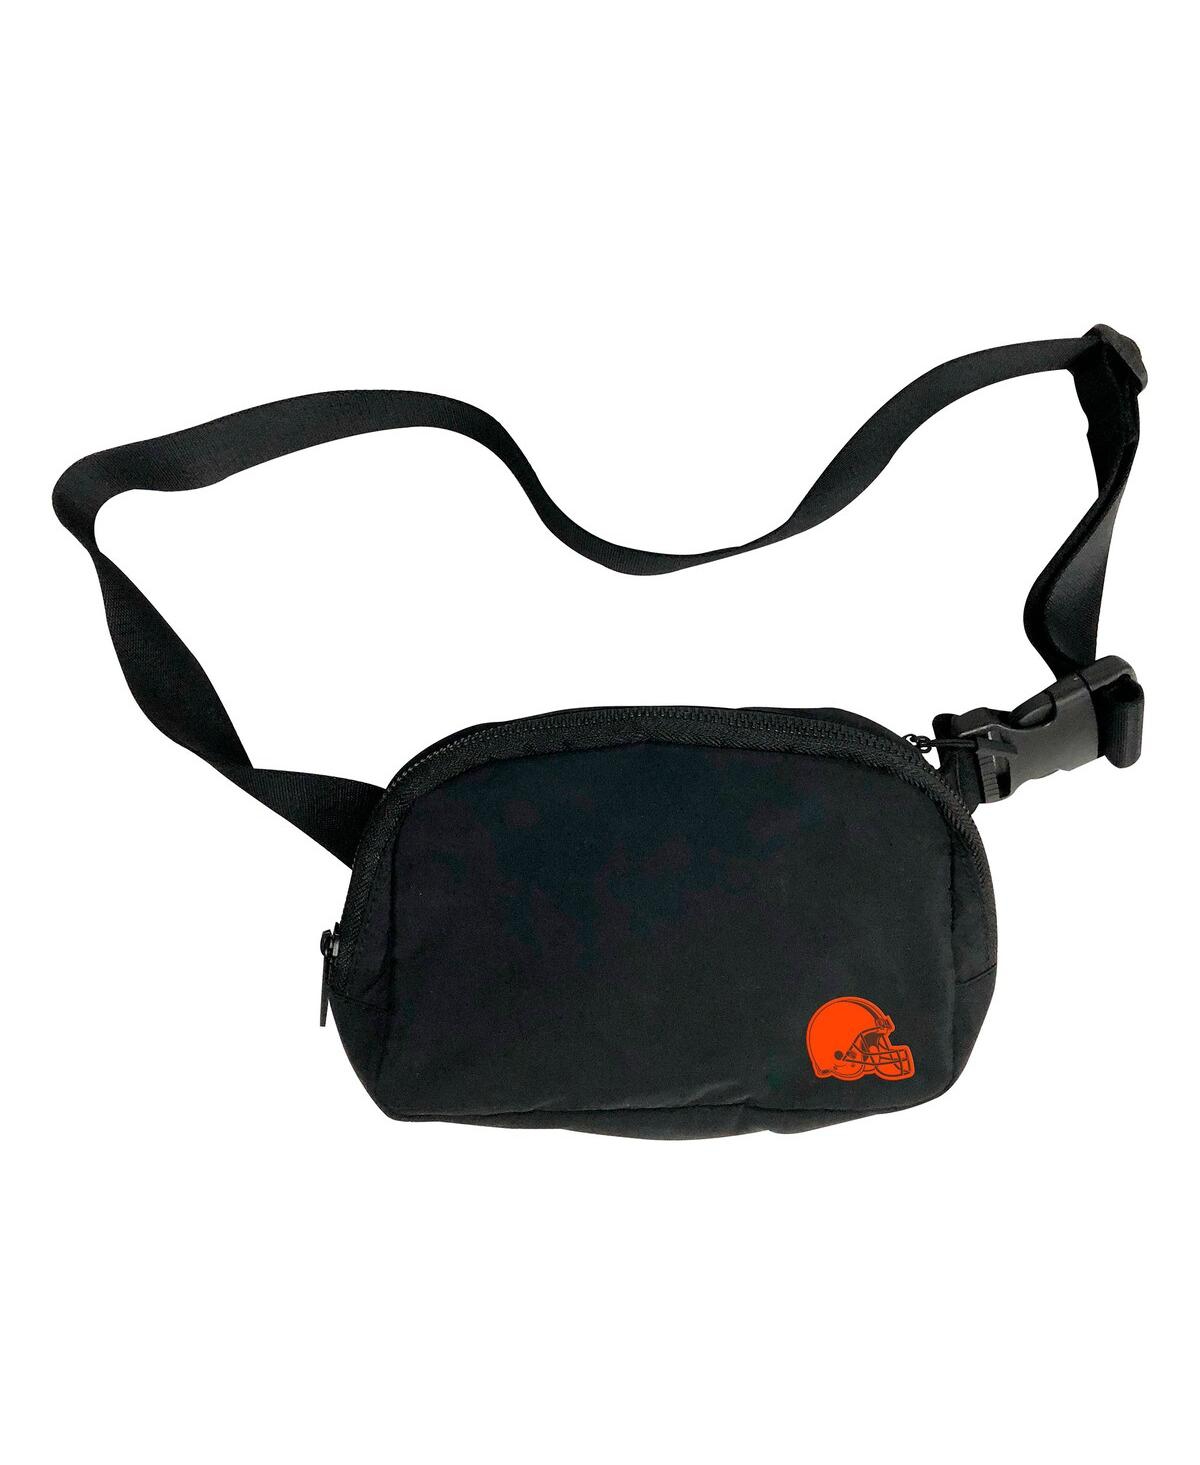 Men's and Women's Cleveland Browns Fanny Pack - Black